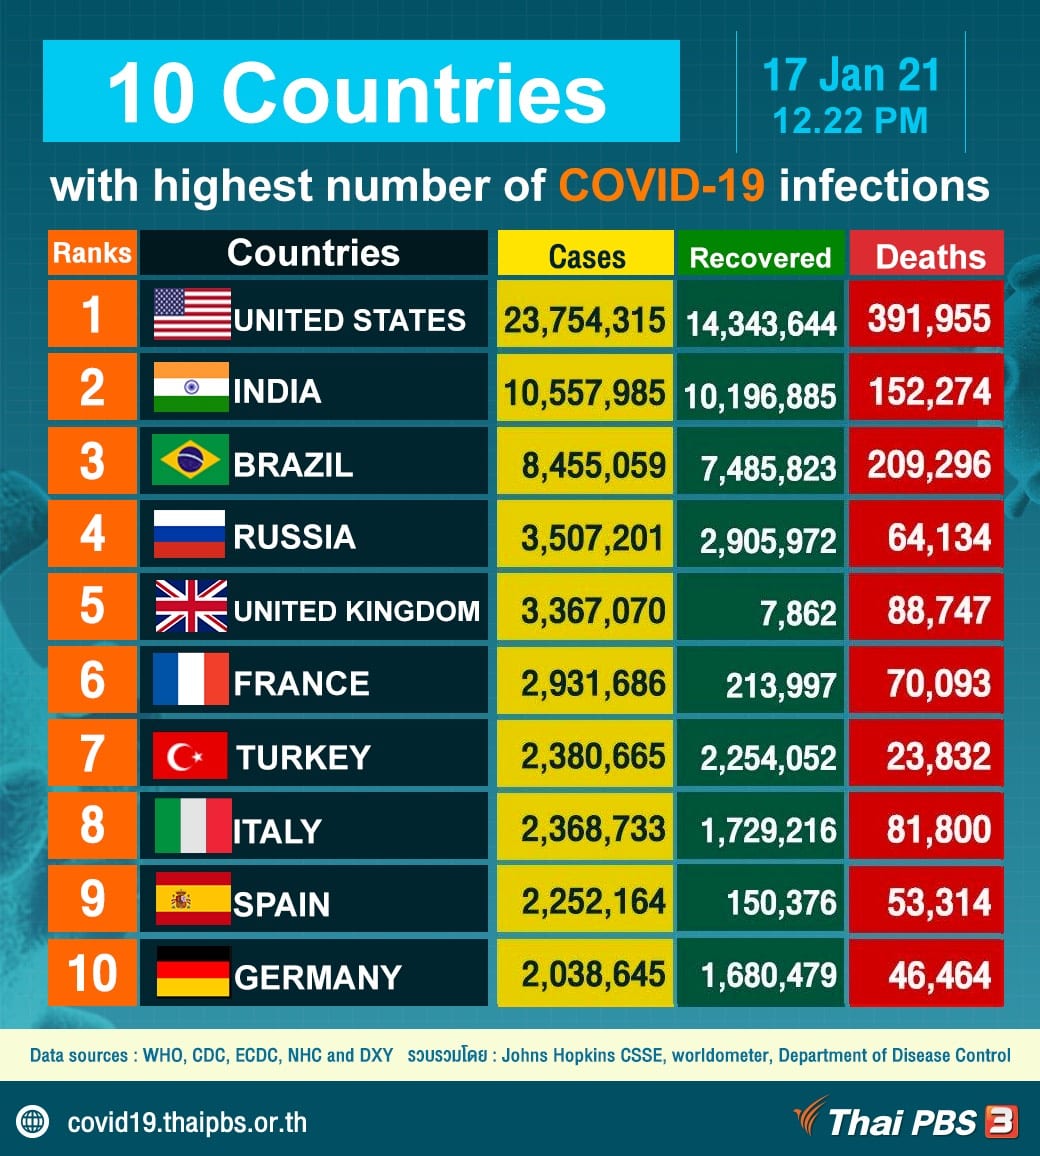 10 Countries with highest number of COVID